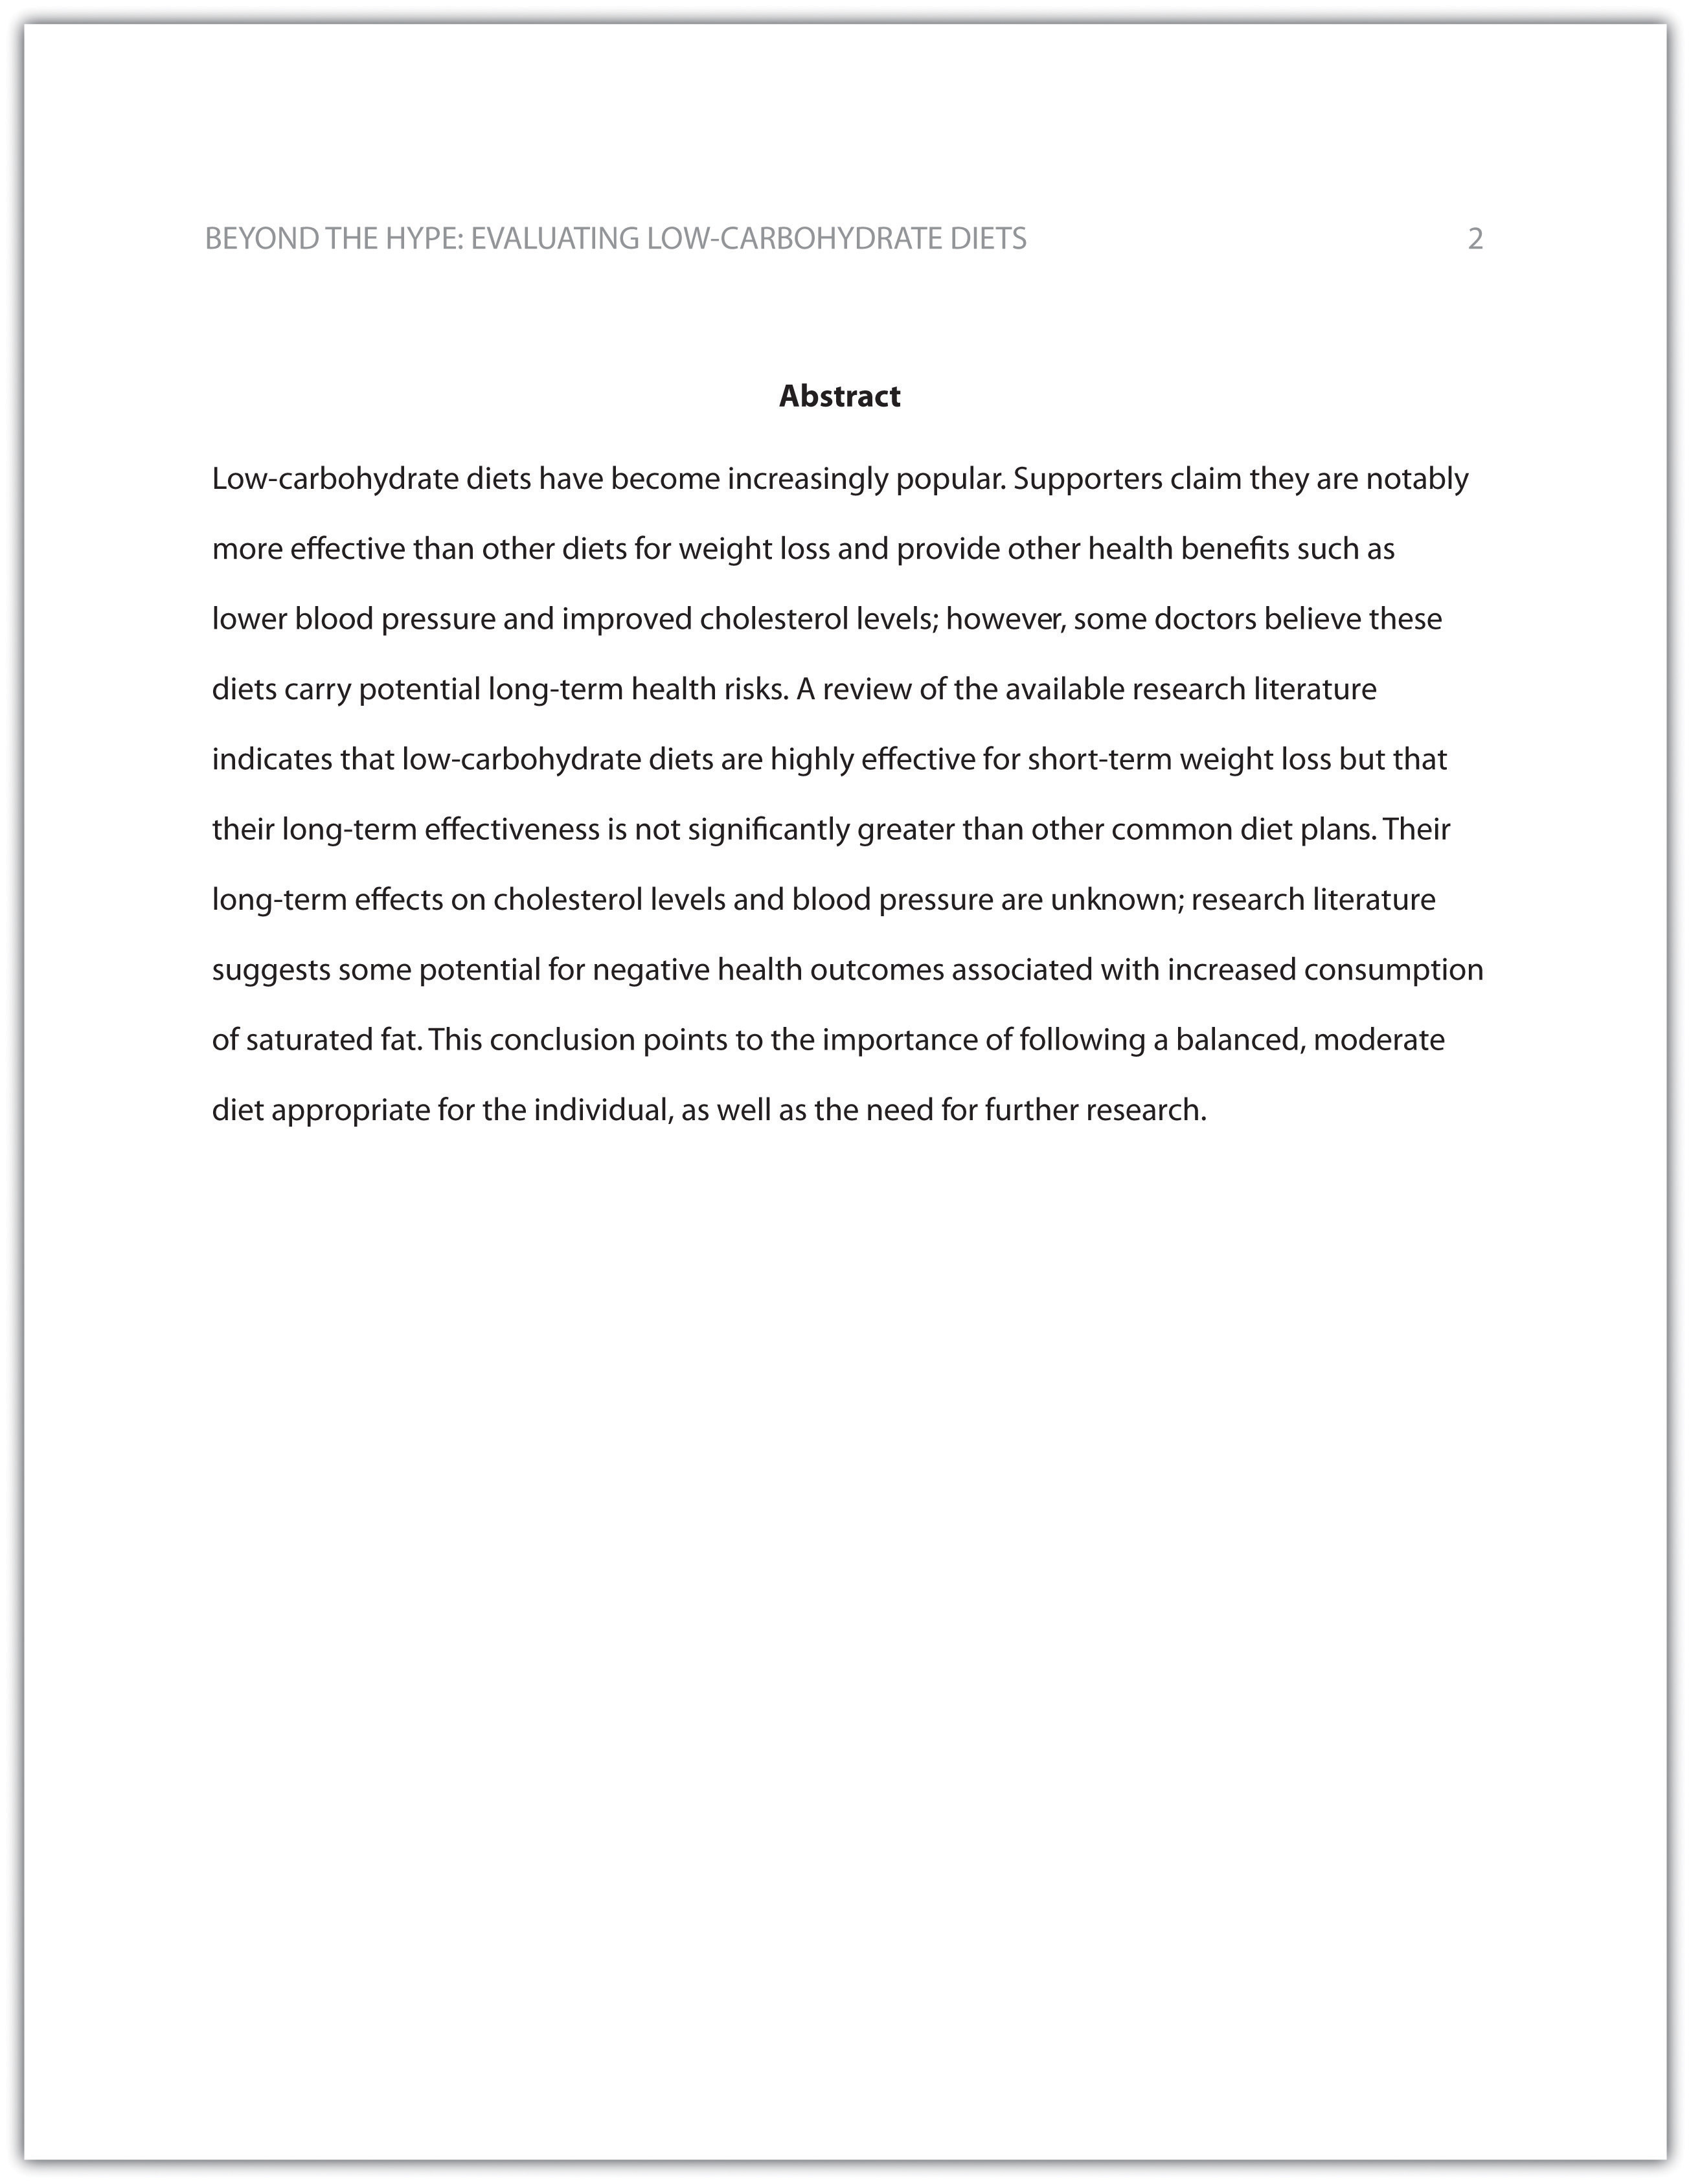 how write an abstract for research paper